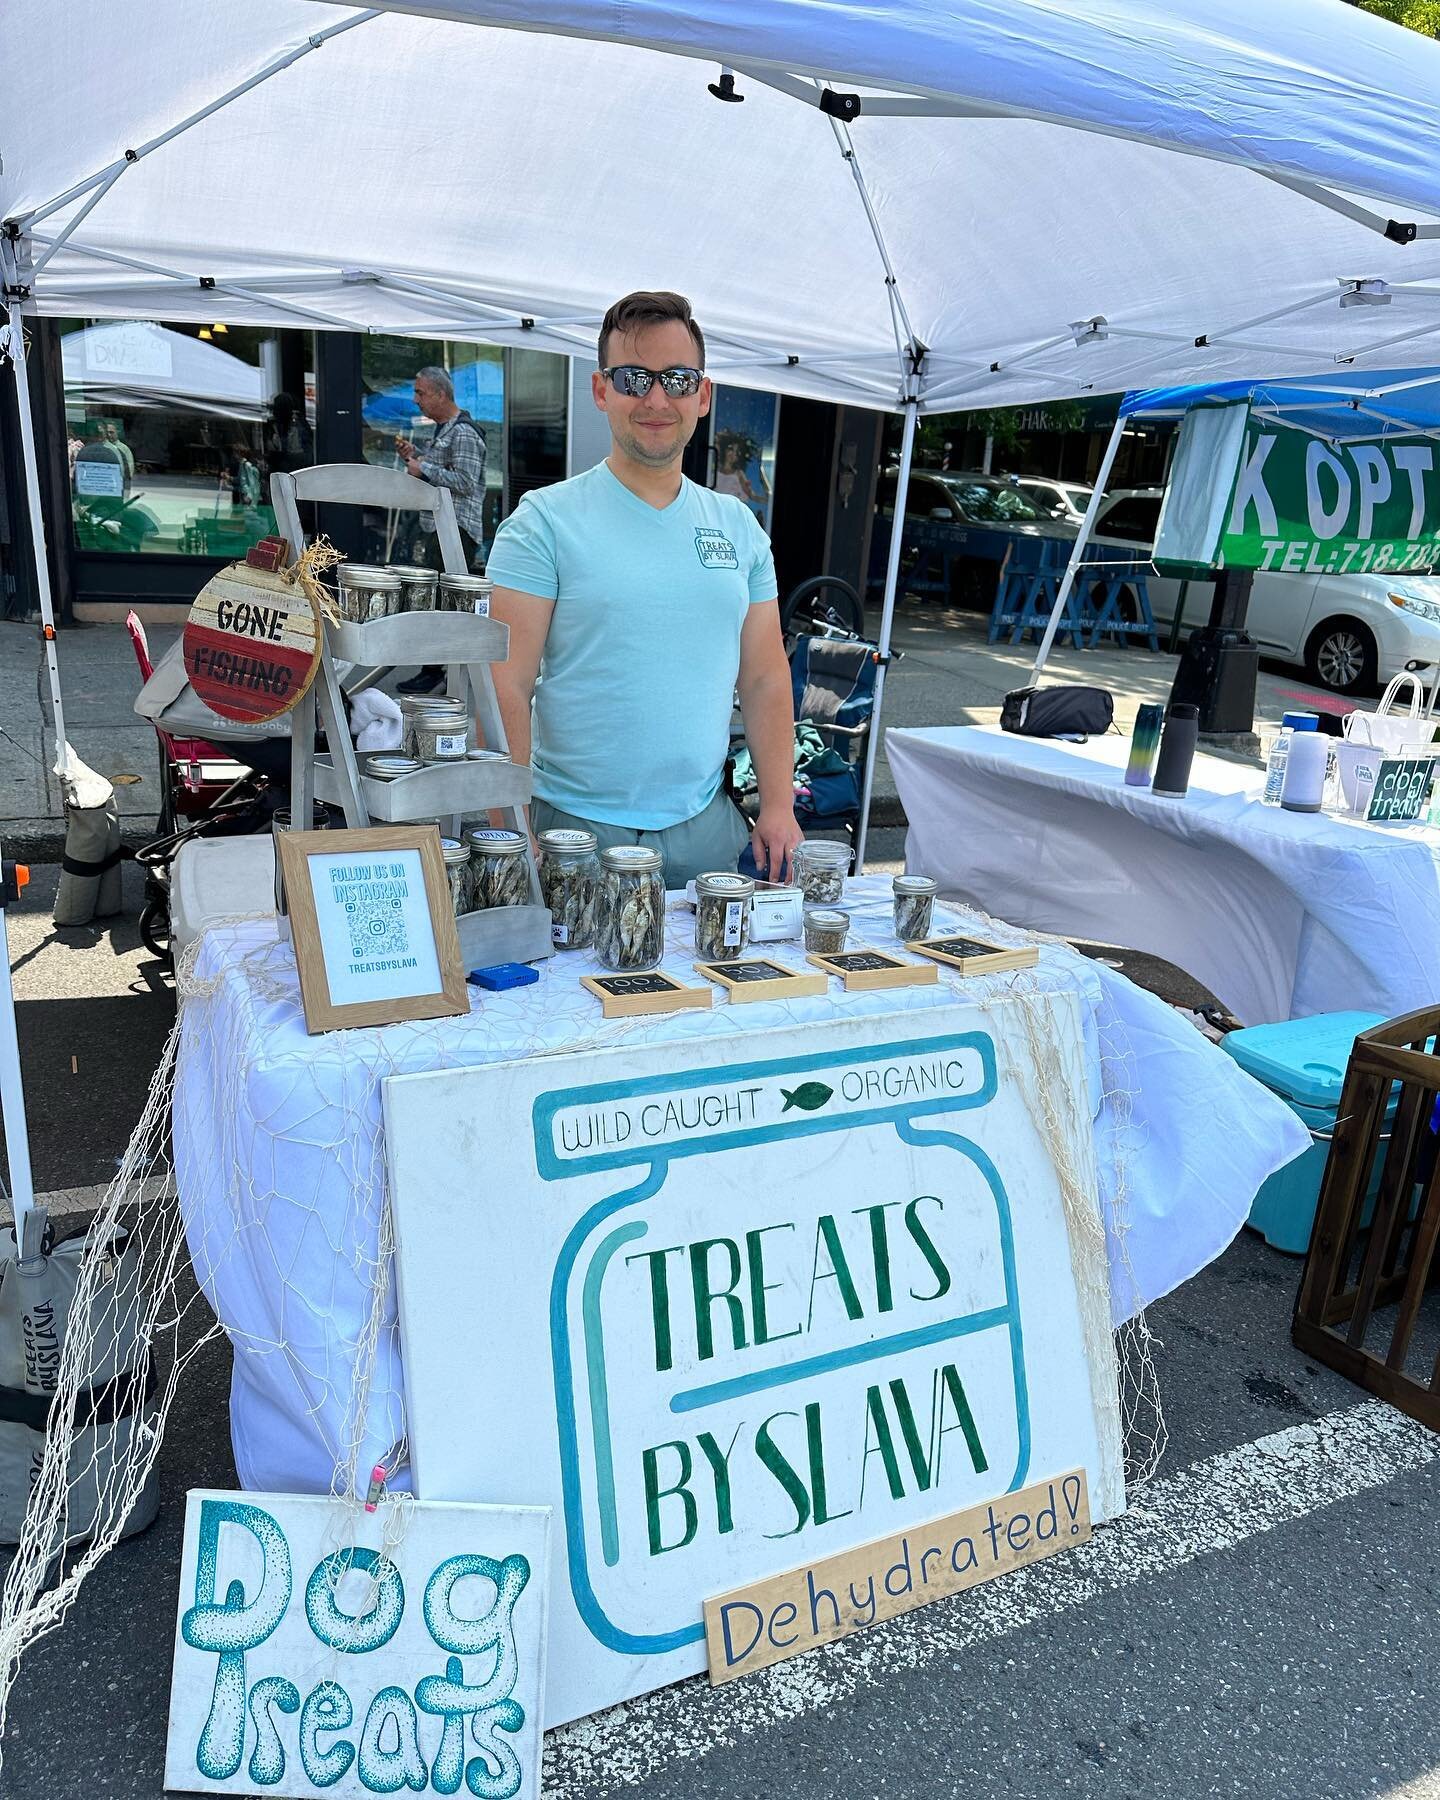 Hey PawRents and PawFriends Catch us here on our booth!! 5th Ave and 4th St in Park Slope, Brooklyn 

#5thaveparkslope 
#parkslopestreetfairon5thave 
#treatsbyslava 
#newyorkdogs 
Or
Visit our website!
treatsbyslava.com